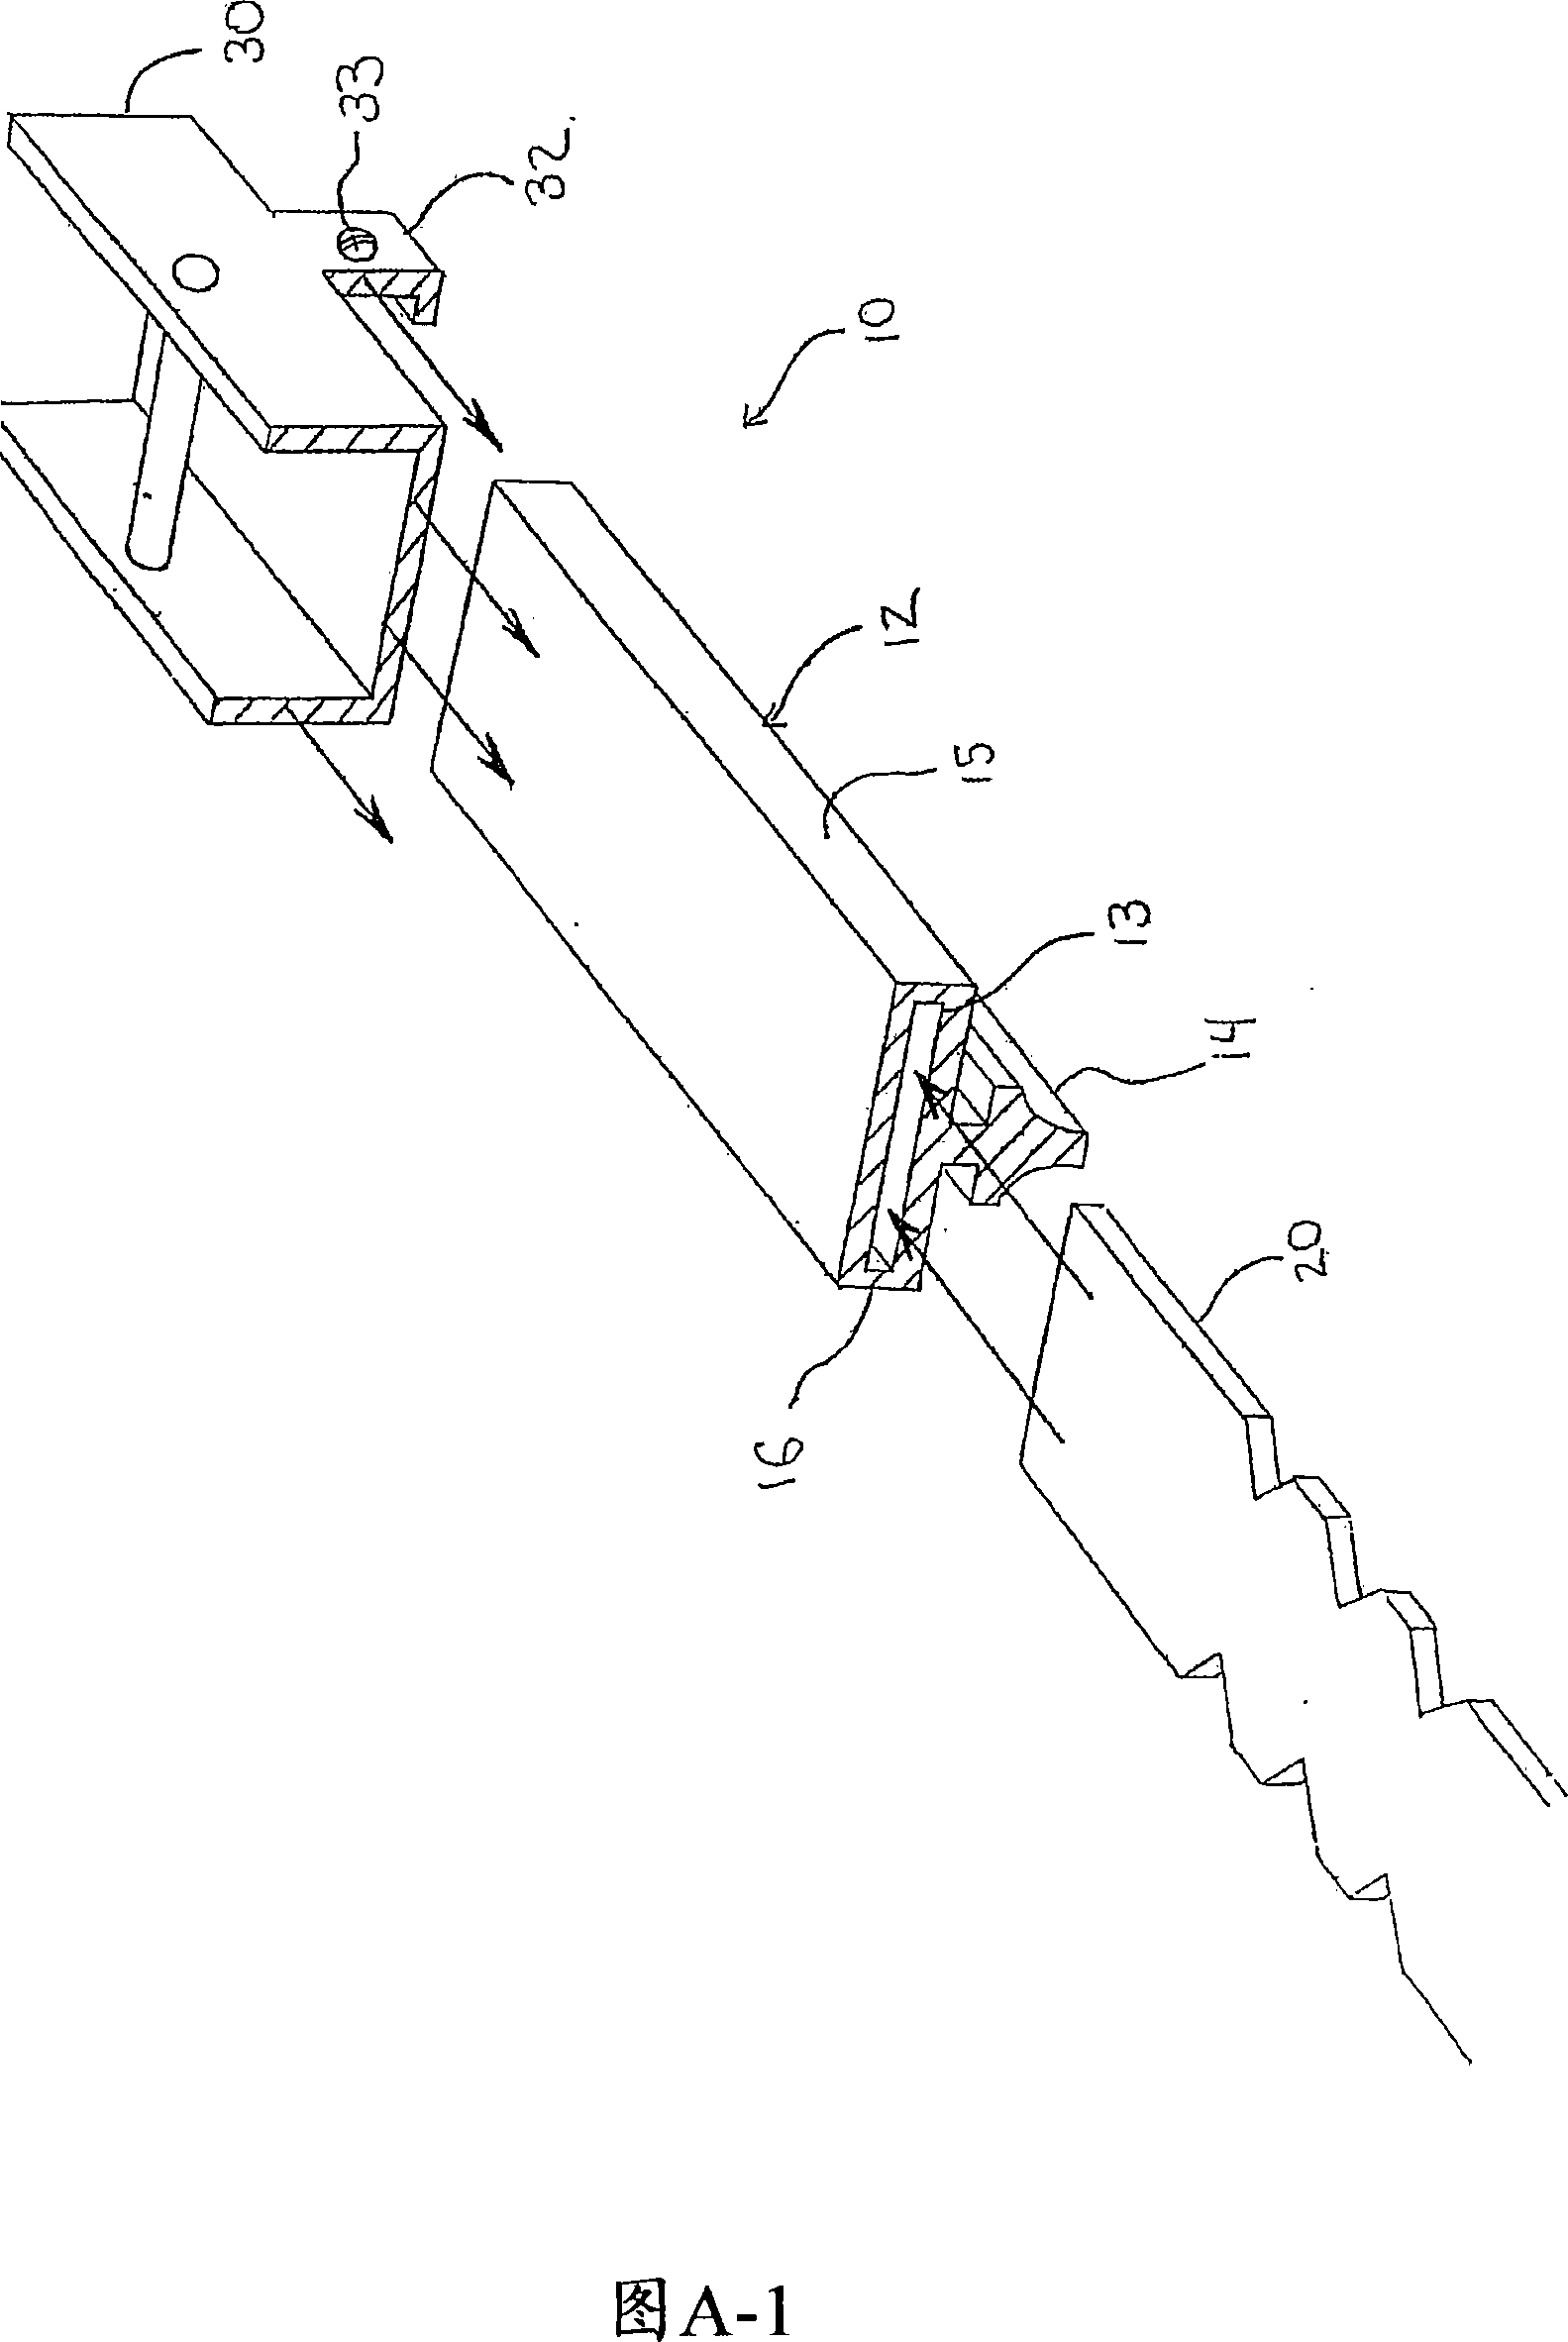 Windshield wiper blade assembly with axial translation prevention system